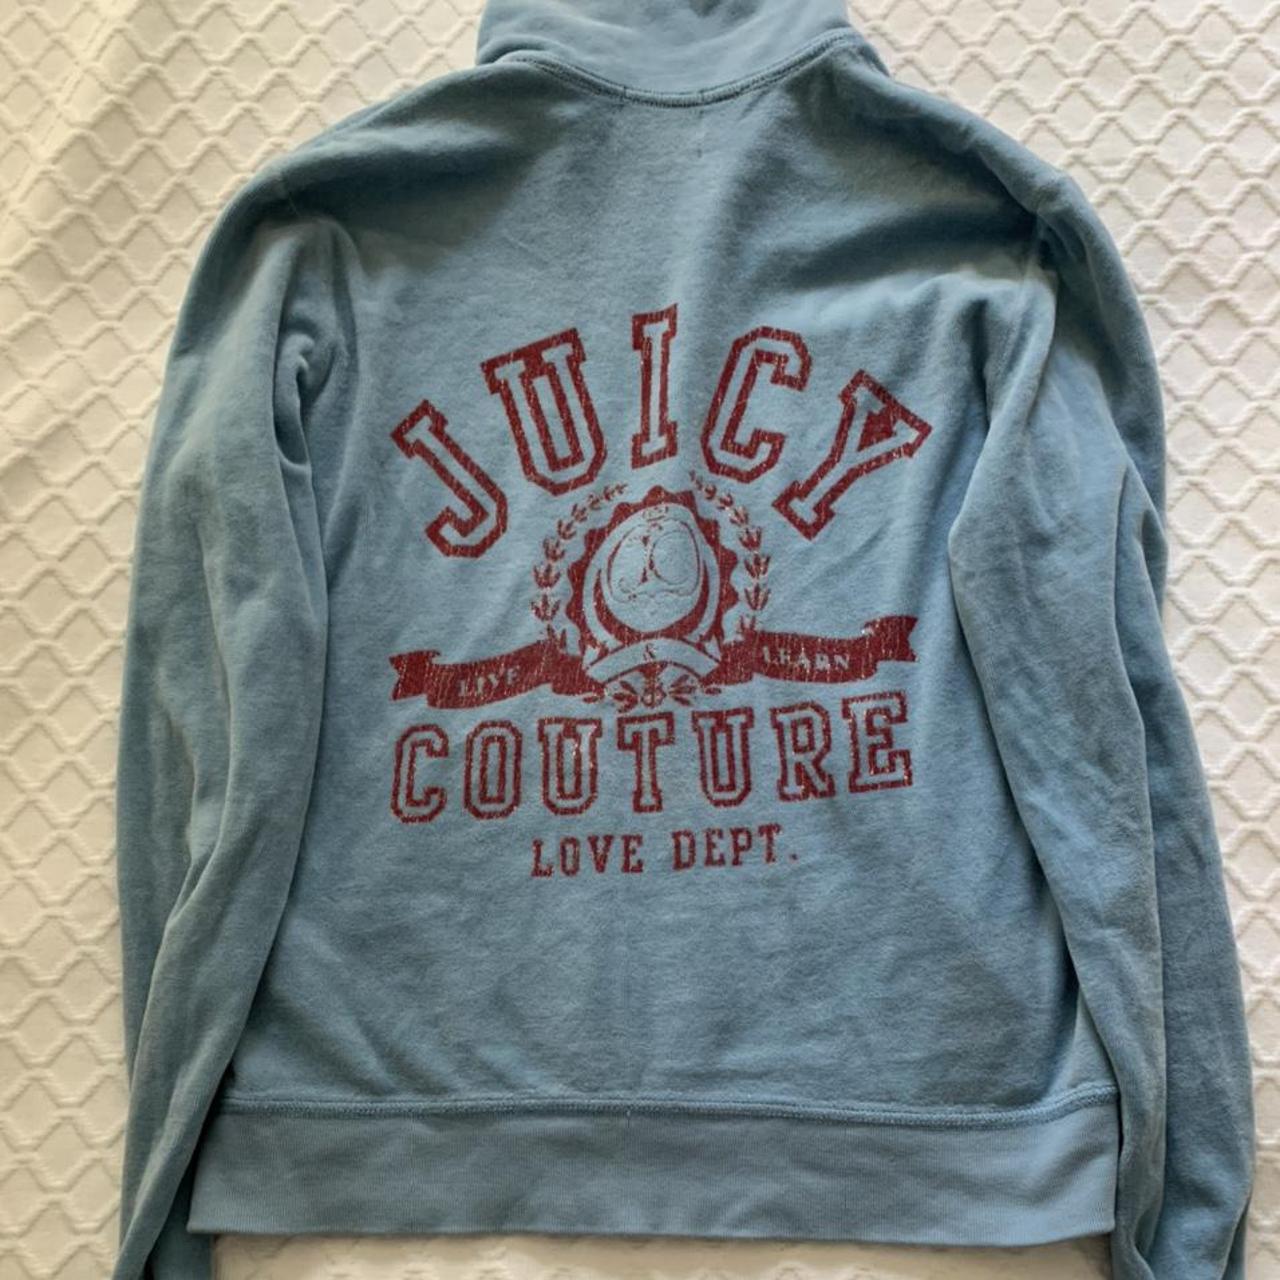 Authentic Juicy Couture tracksuit 🍇 early 2000s y2k - Depop